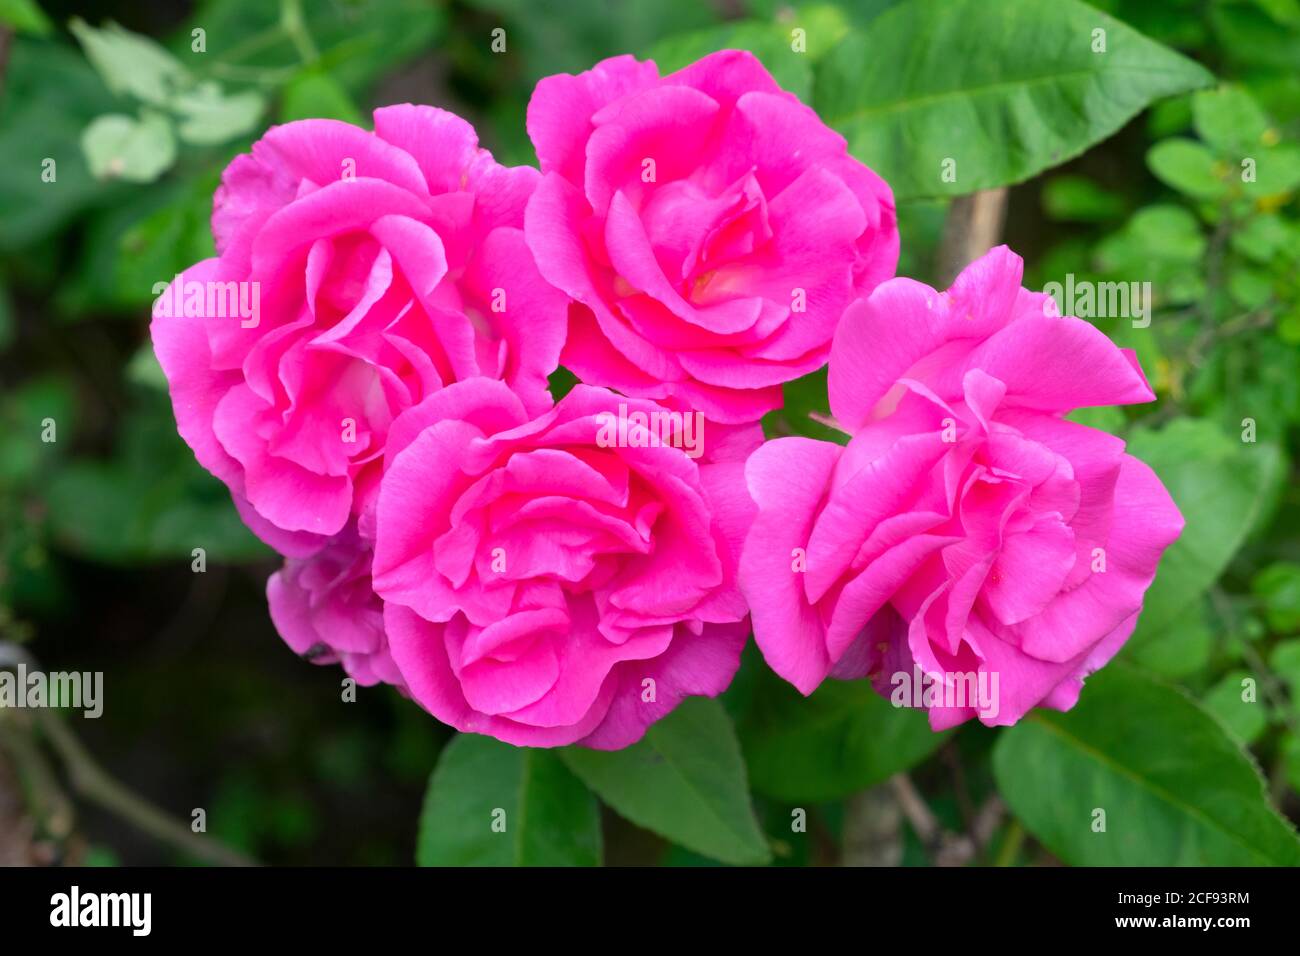 Zephiriine Drouhin rose pink roses closeup close-up view in bloom in a garden in August Carmarthenshire Wales UK Great Britain  KATHY DEWITT Stock Photo